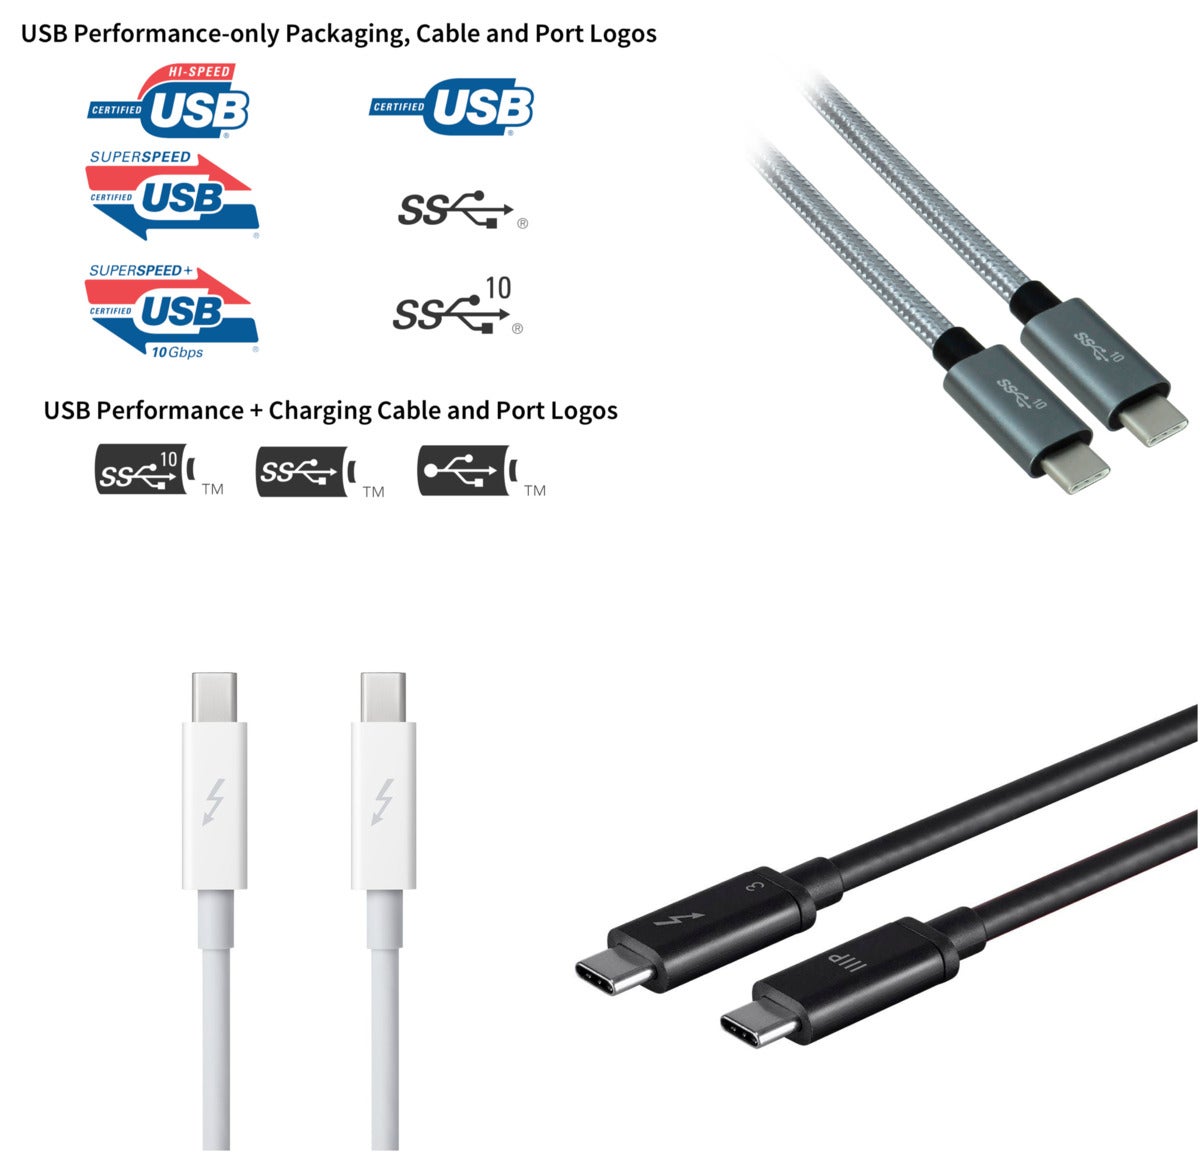 Bloom rustfri pedal How to tell if your USB-C cable is USB only or supports Thunderbolt 3 |  Macworld